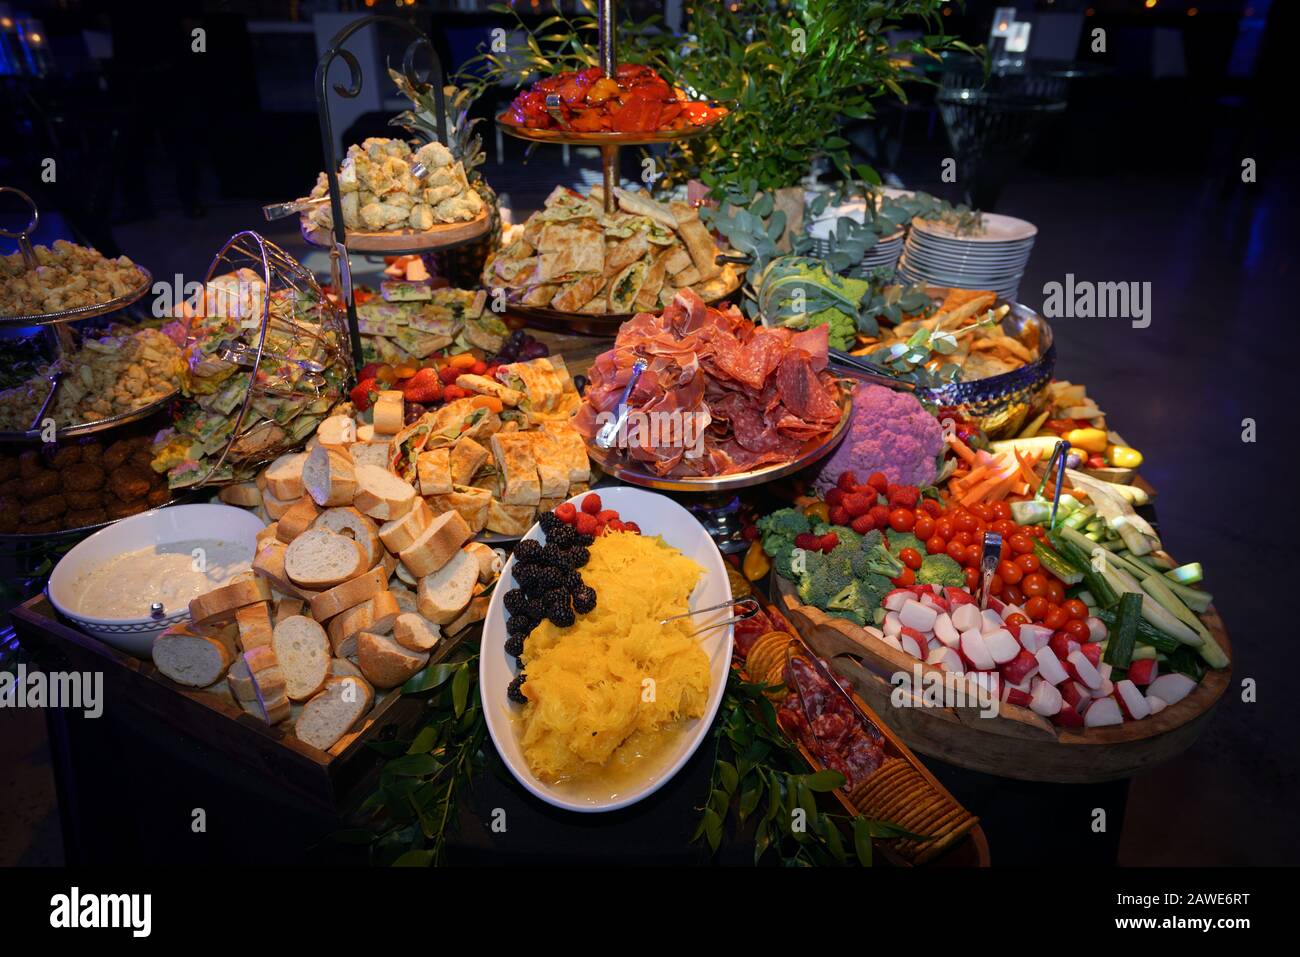 Montreal,Quebec,Canada,February 7,2020.Display of a gourmet buffet at a  reception. Montreal,Quebec,Canada.Credit:Mario Beauregard/Alamy News Stock  Photo - Alamy